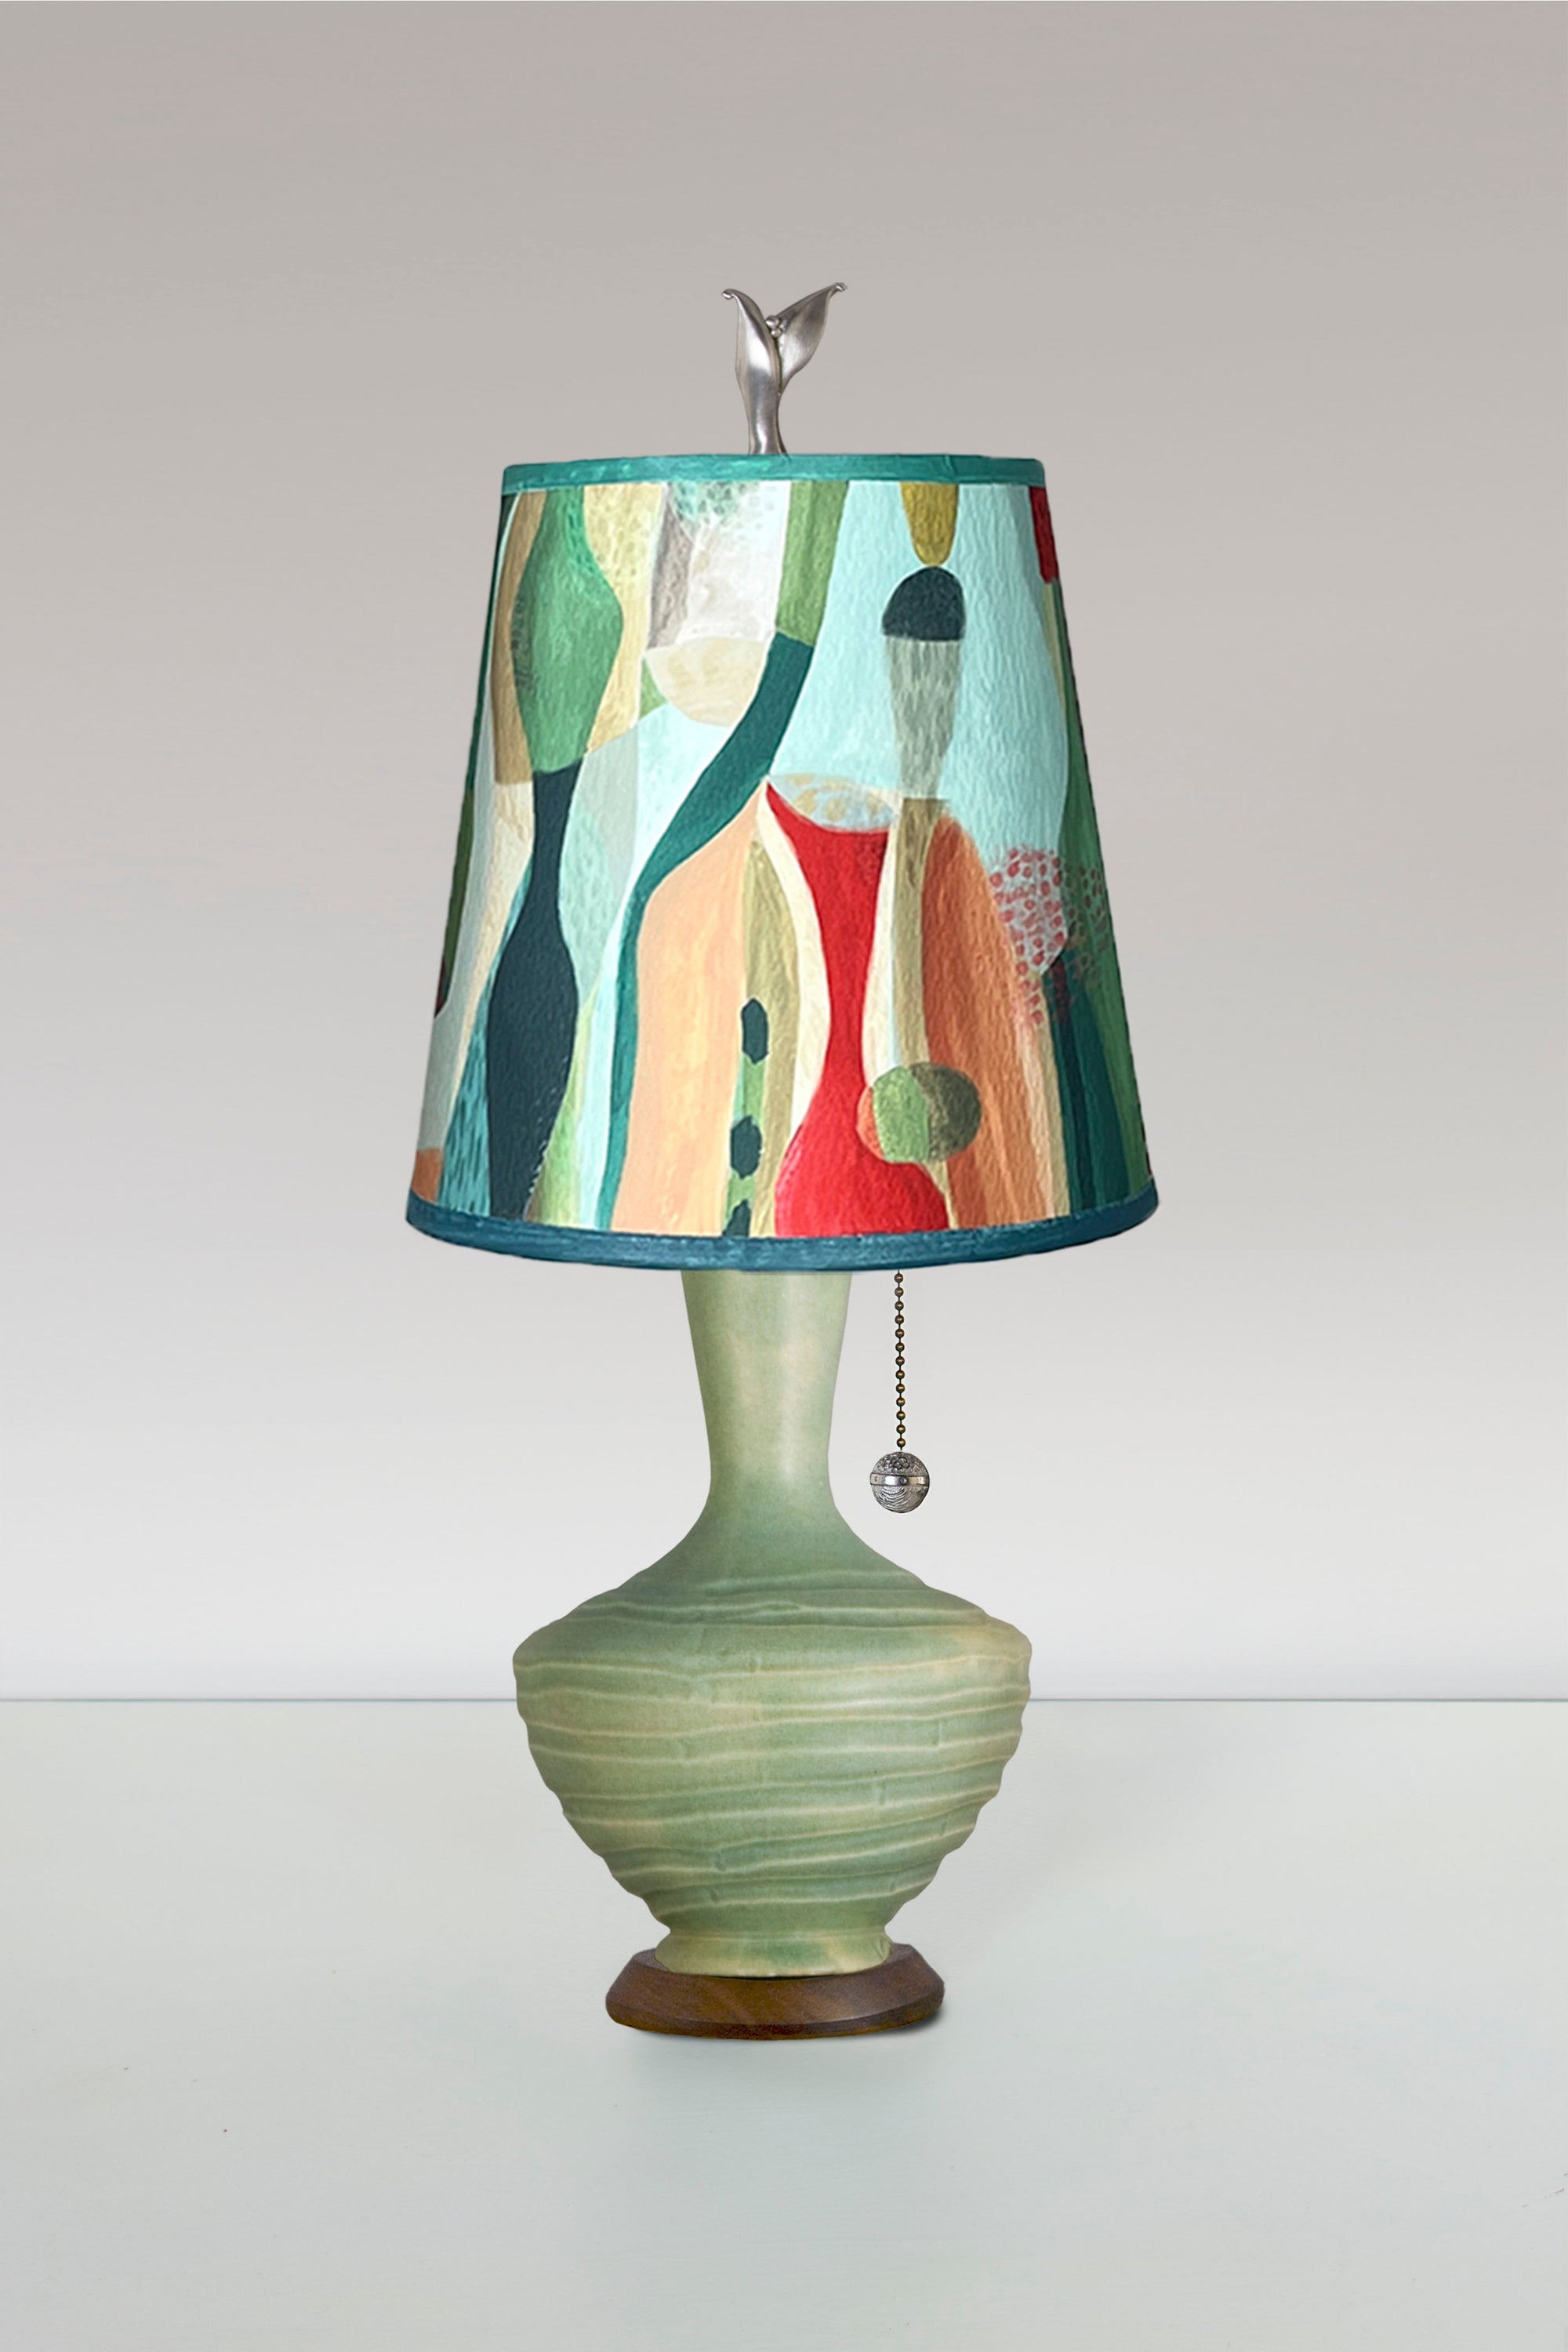 Janna Ugone & Co Table Lamp Ceramic Table Lamp in Old Copper with Small Drum Shade in Riviera in Poppy